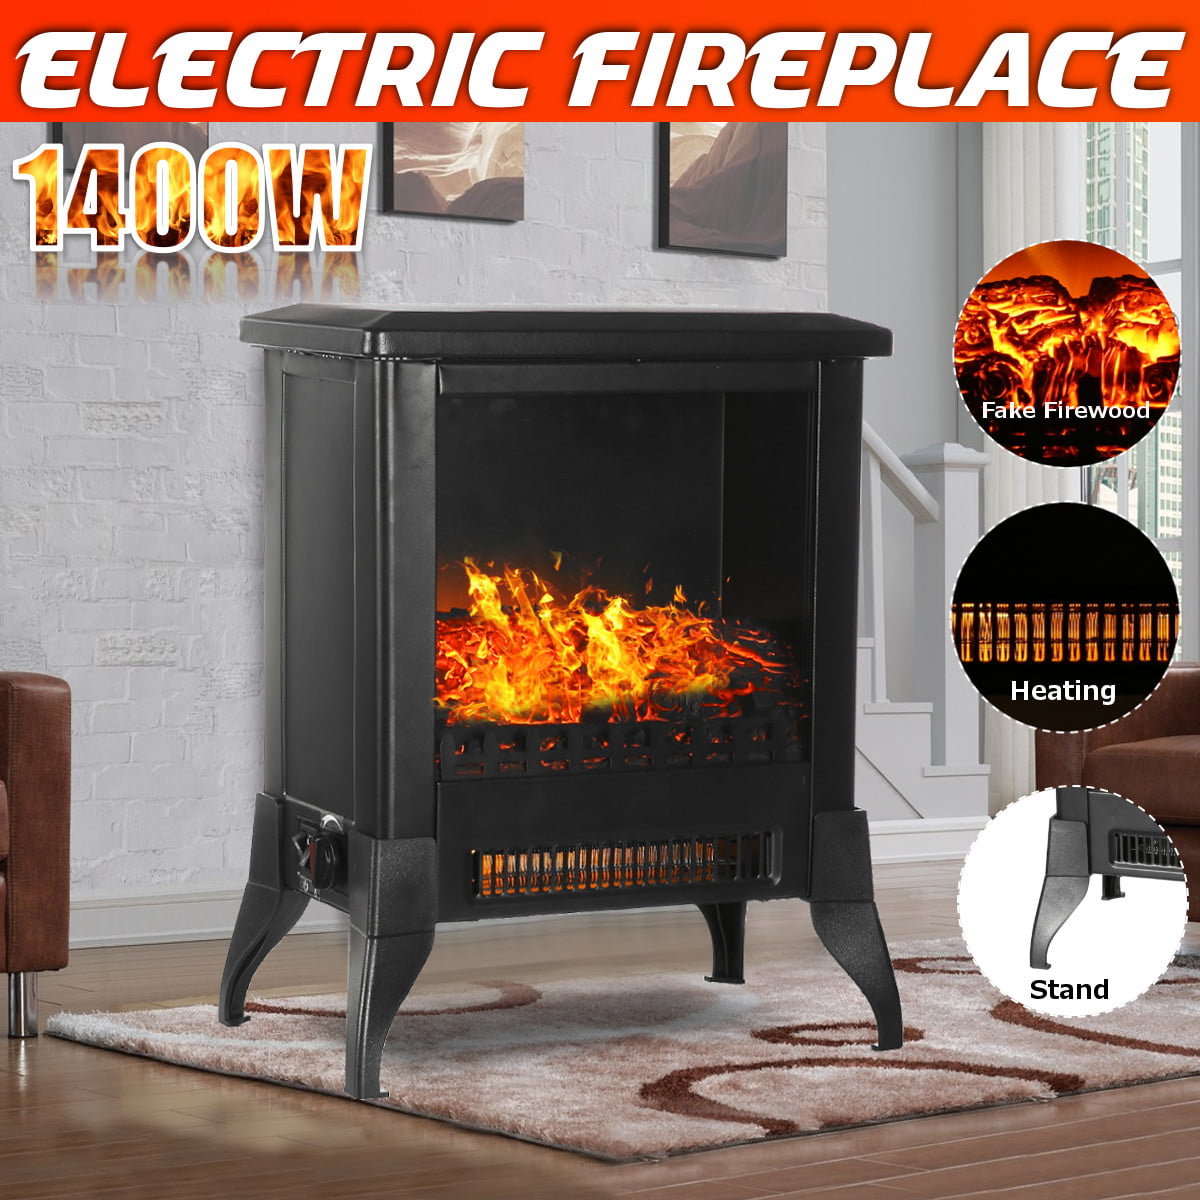 Freestanding Fireplace Heater with Realistic Flame Overheating Safety System 1000W/1500W Portable Indoor Electric Stove Heater Thermostat Infrared Xbeauty Electric Fireplace Stove 16 Inch